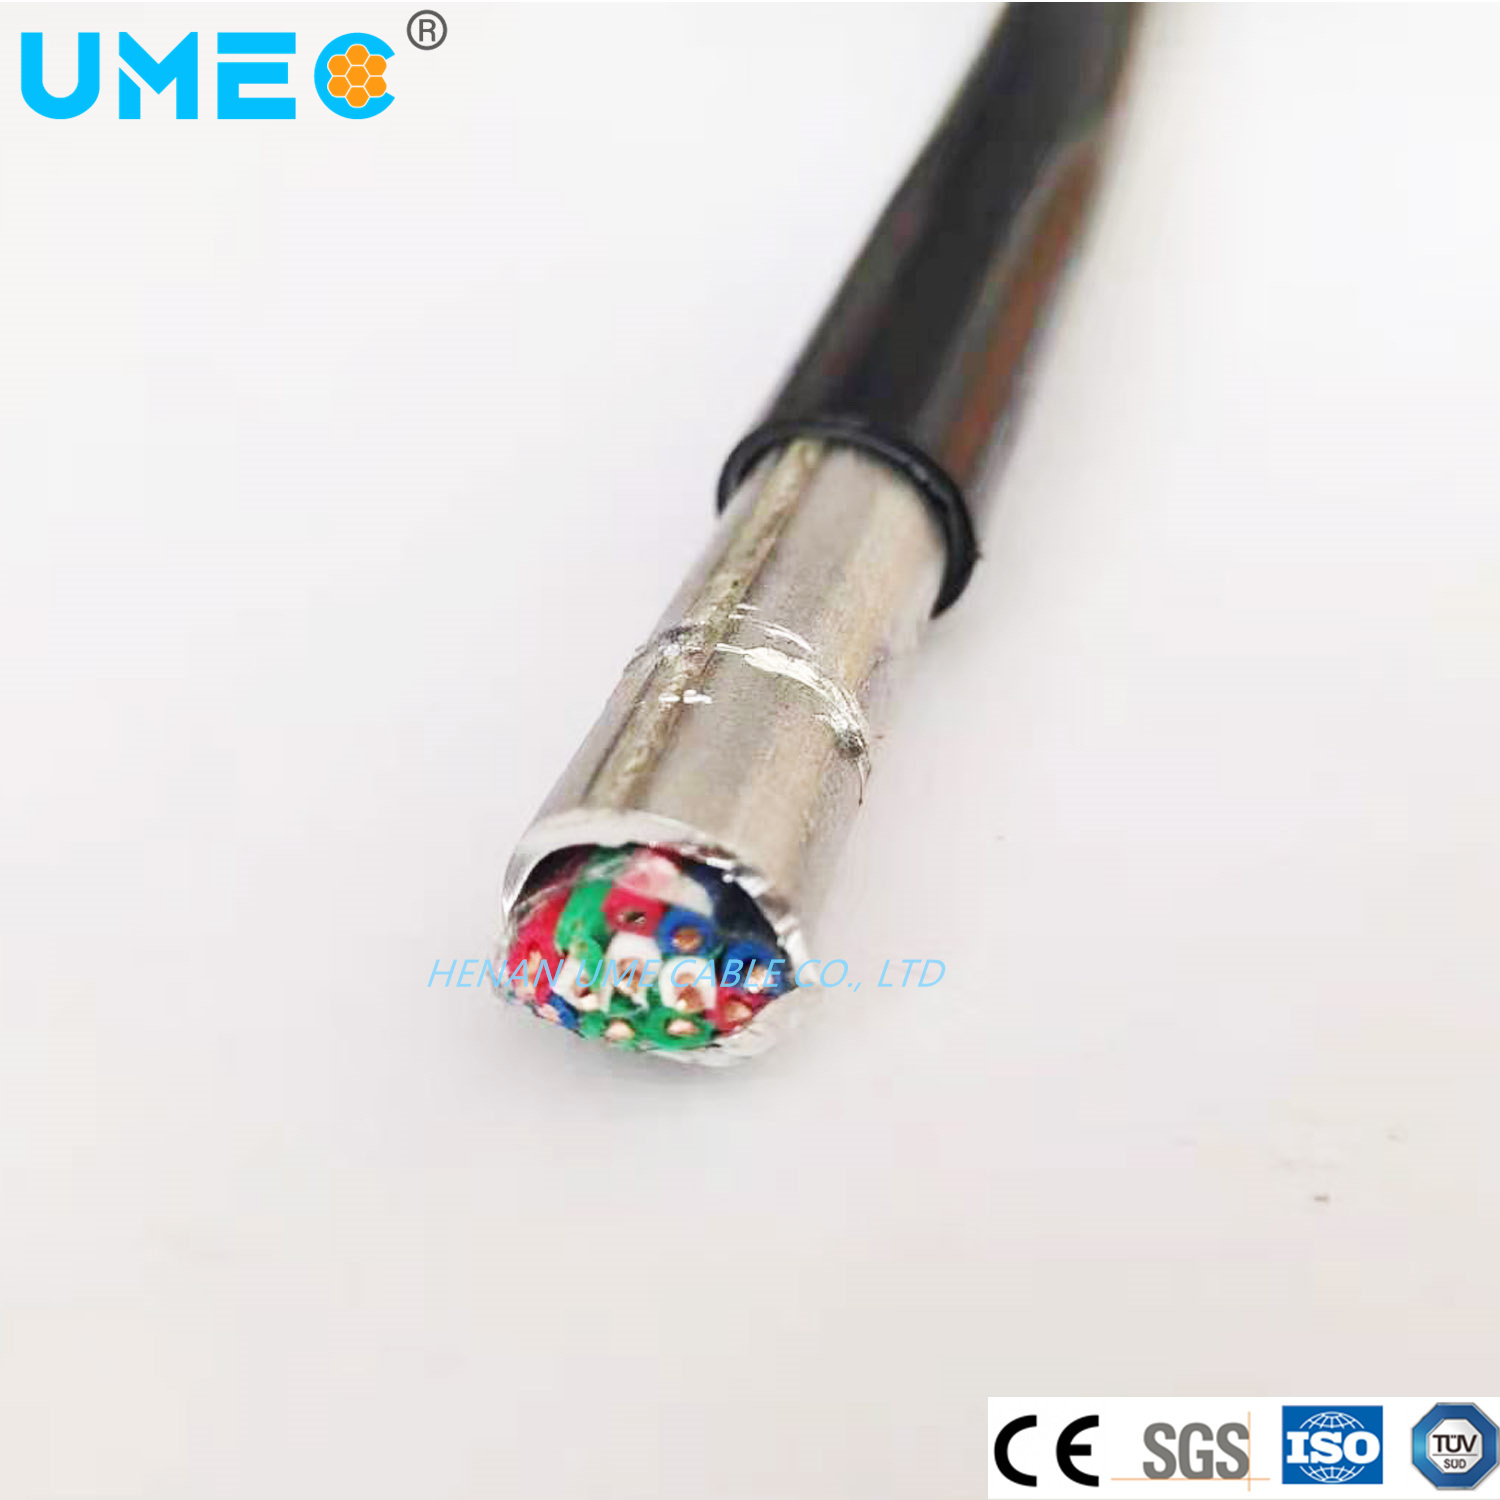 China Factory Direct Railway Signal Audio Signal Automatic Signal Device Ptya Cable 16cx1mm 19X1mm Price in Roll or in Drum